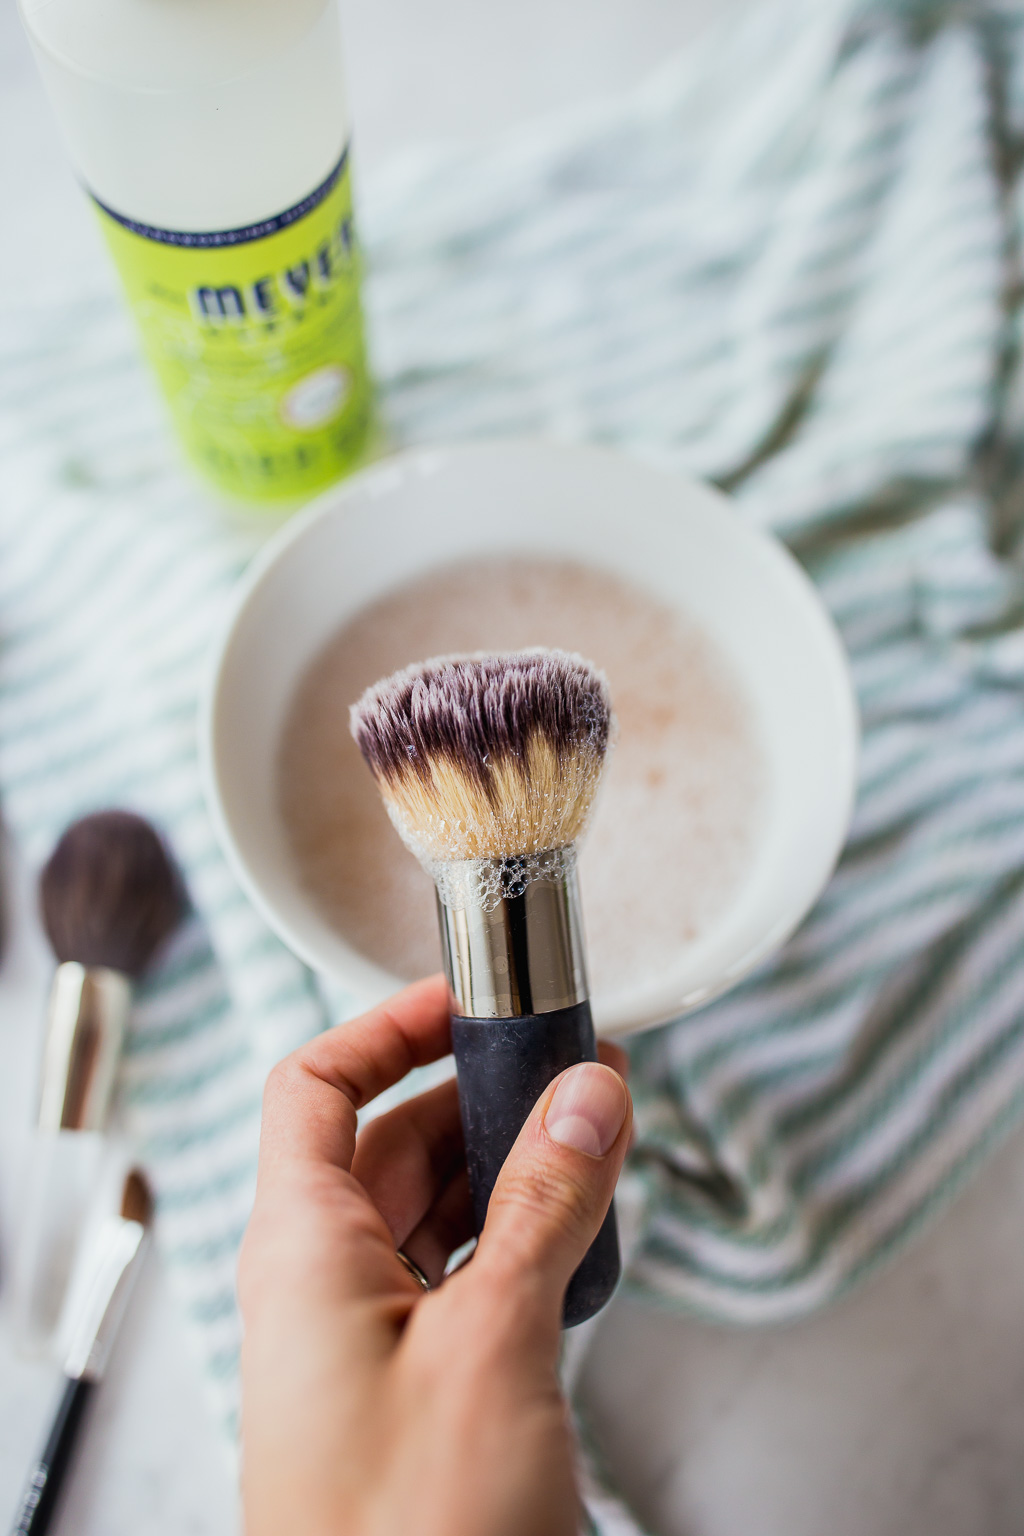 makeup brush after dipping in a cleaner 